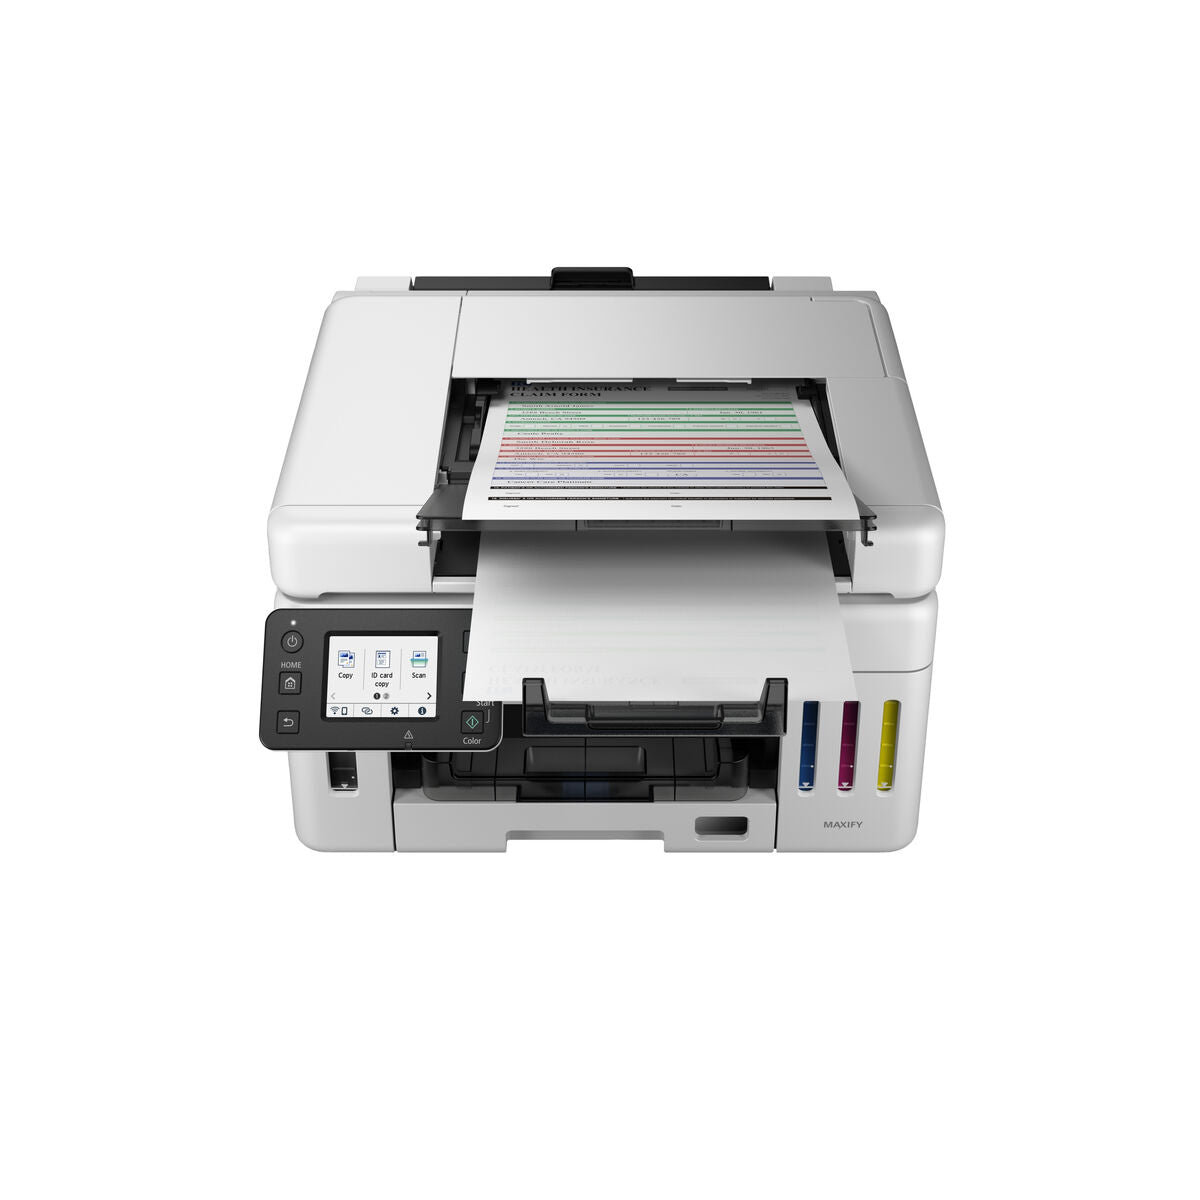 Multifunction Printer Canon MAXIFY GX6550, Canon, Computing, Printers and accessories, multifunction-printer-canon-maxify-gx6550, :Inkjet Printers, Brand_Canon, category-reference-2609, category-reference-2642, category-reference-2645, category-reference-t-19685, category-reference-t-19911, category-reference-t-21378, category-reference-t-25692, computers / peripherals, Condition_NEW, office, Price_500 - 600, Teleworking, RiotNook